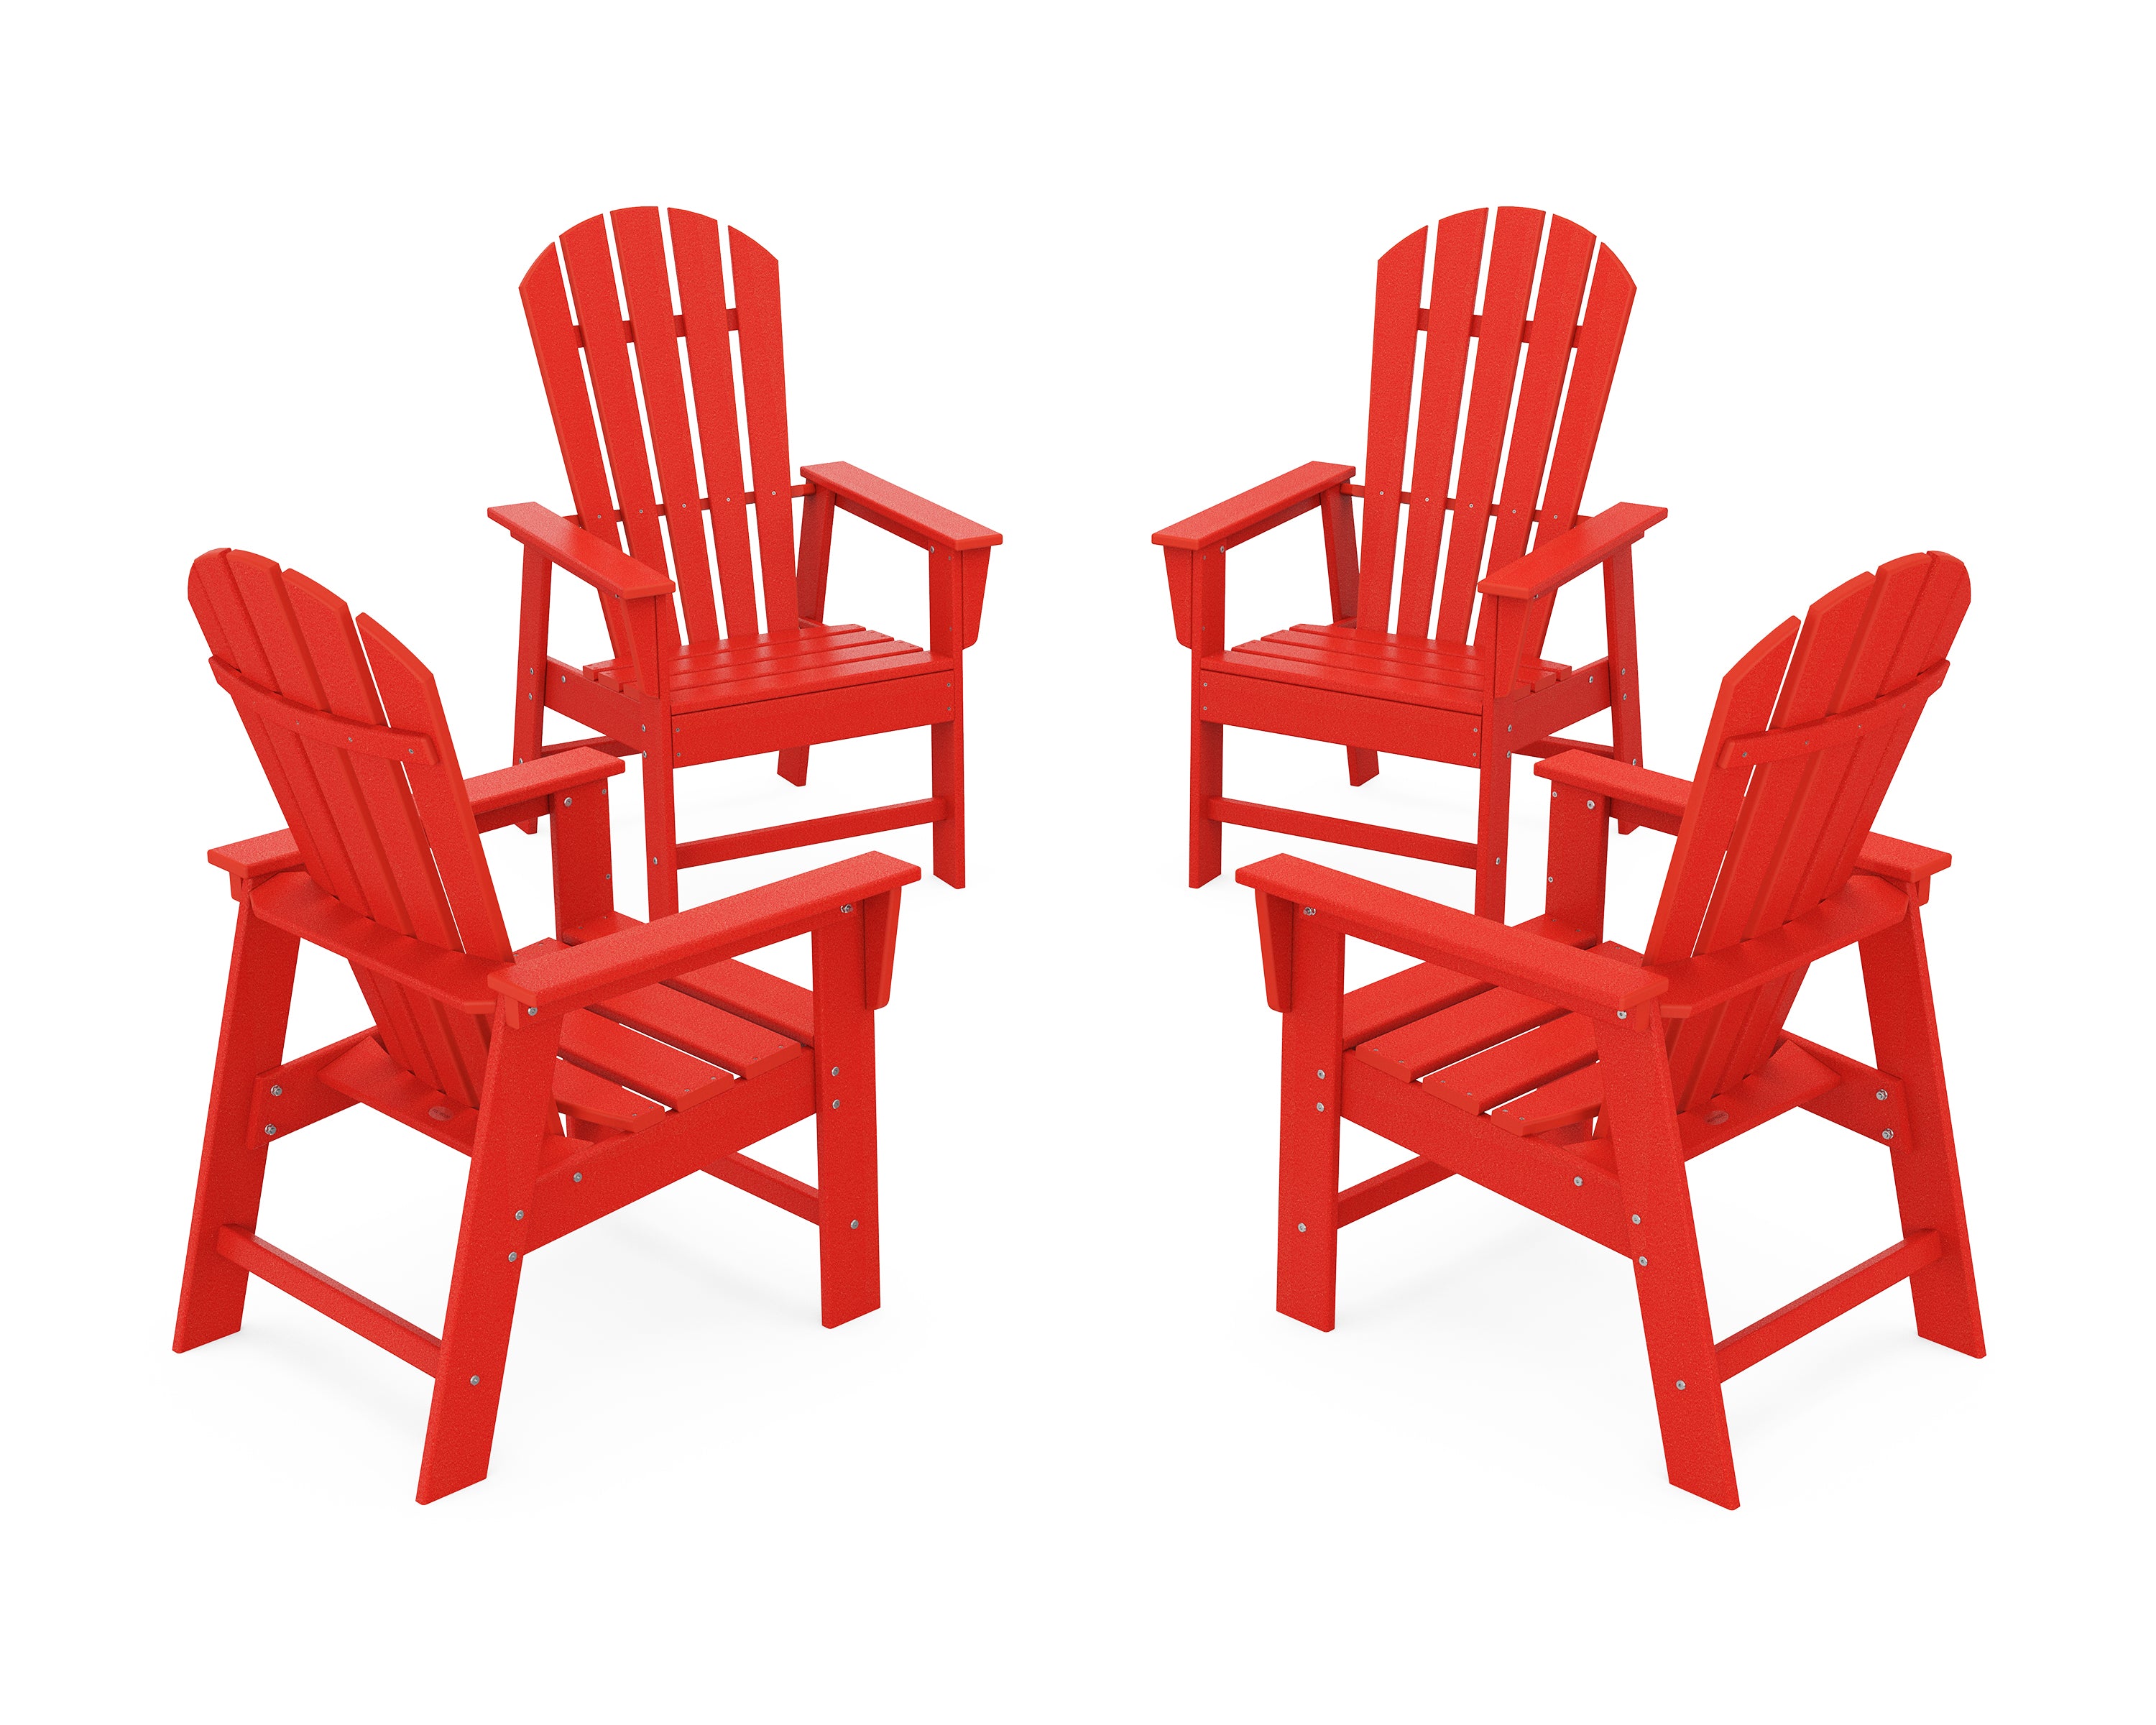 POLYWOOD® 4-Piece South Beach Casual Chair Conversation Set in Sunset Red